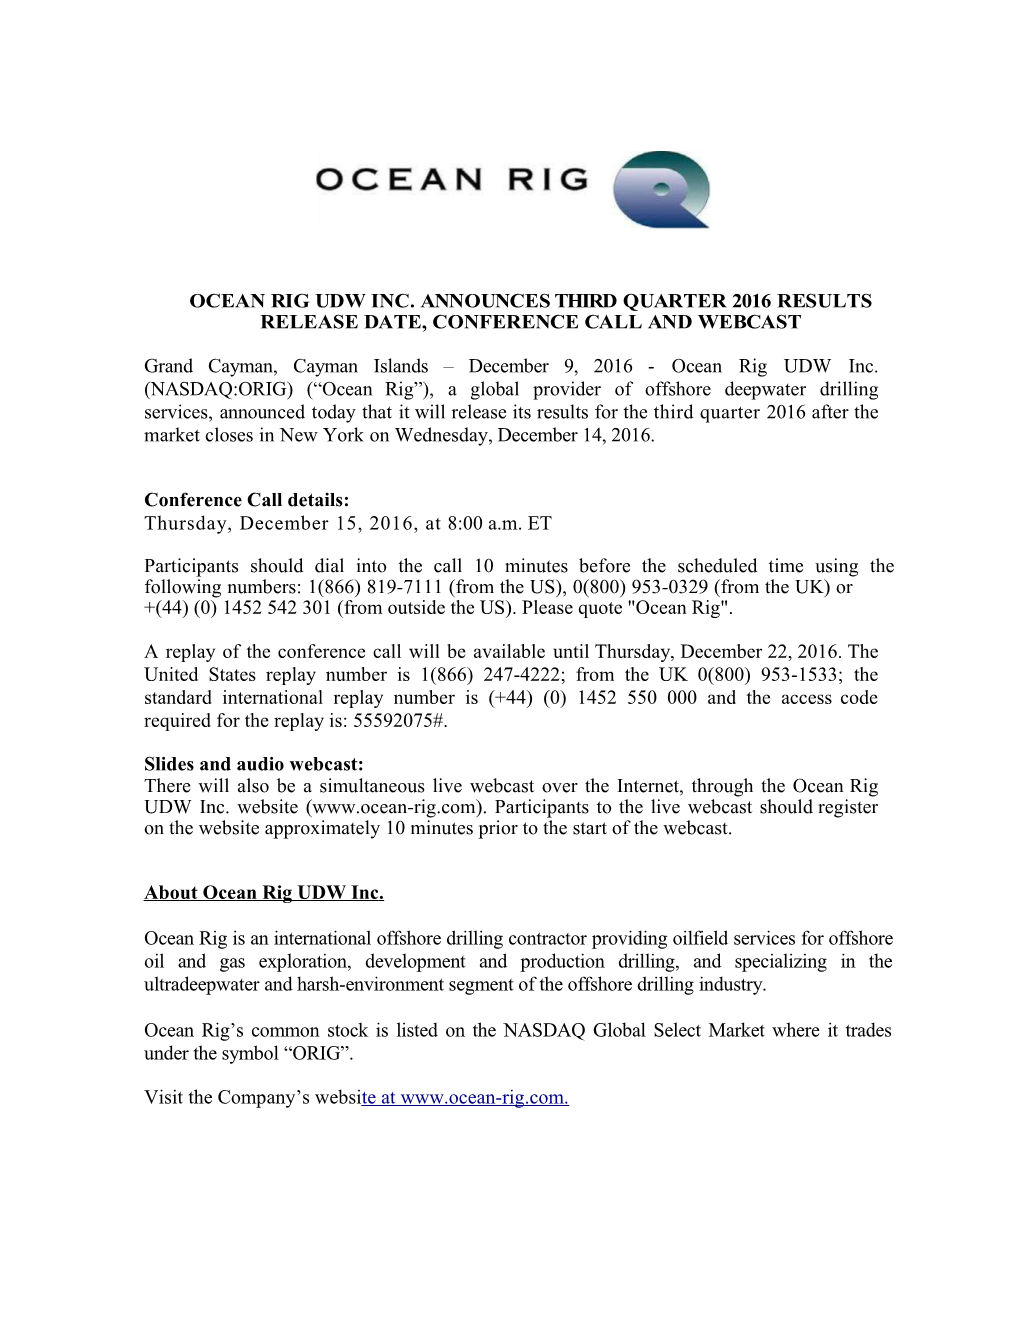 Ocean Rig Udw Inc. Announces Third Quarter 2016 Results Release Date, Conference Call And